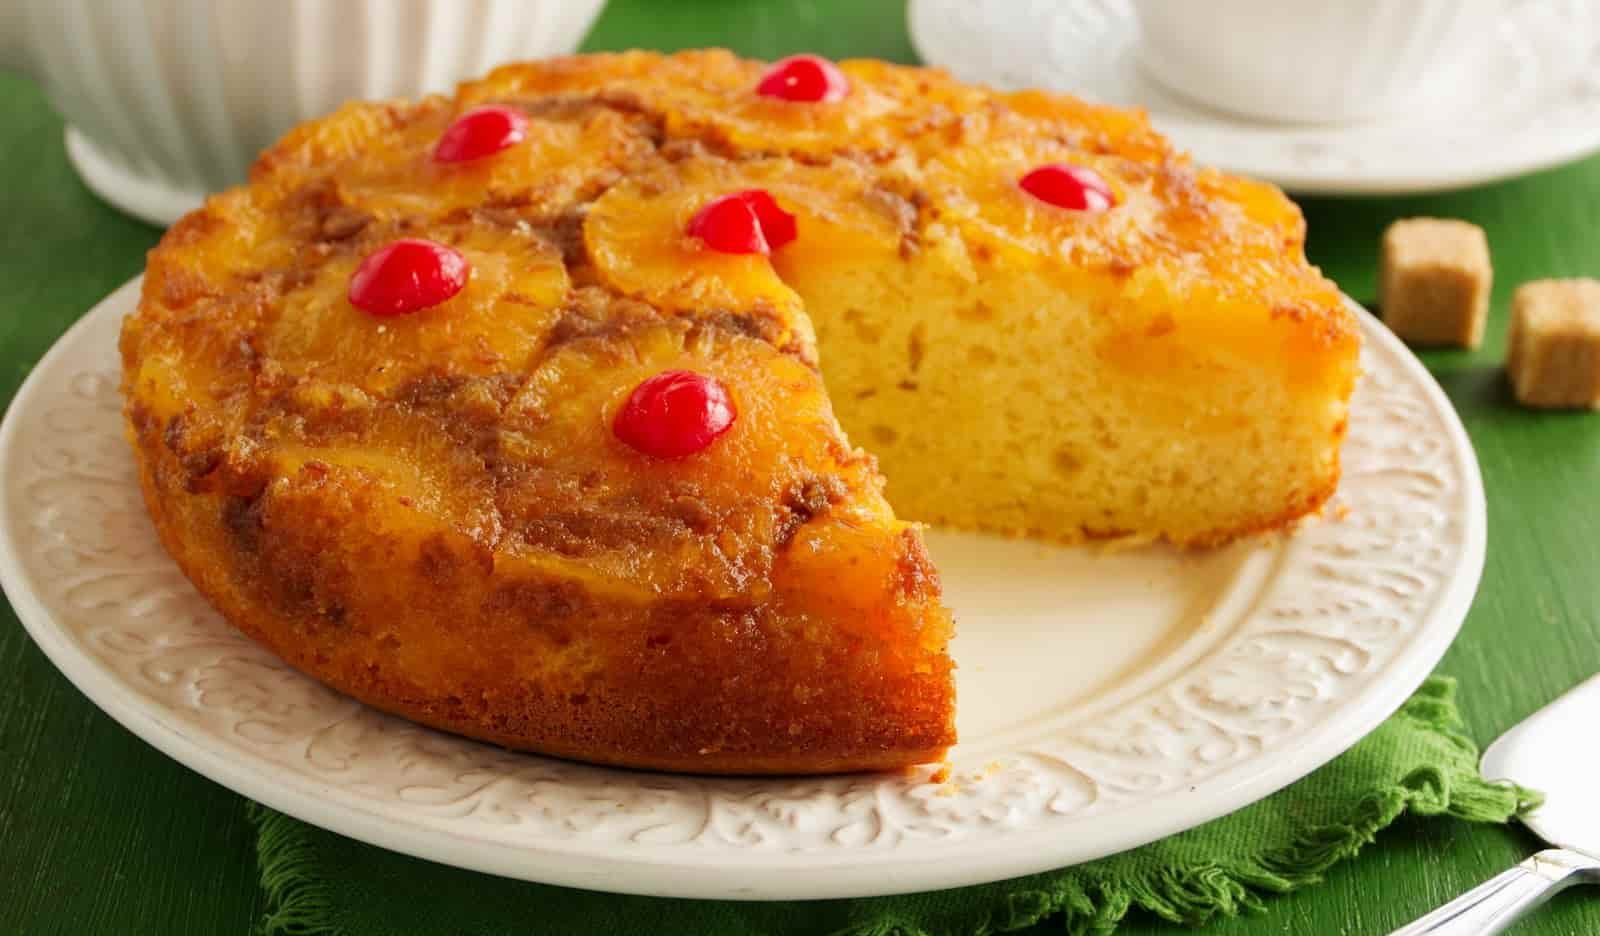 Nutritional value of instant pineapple and cherry cake